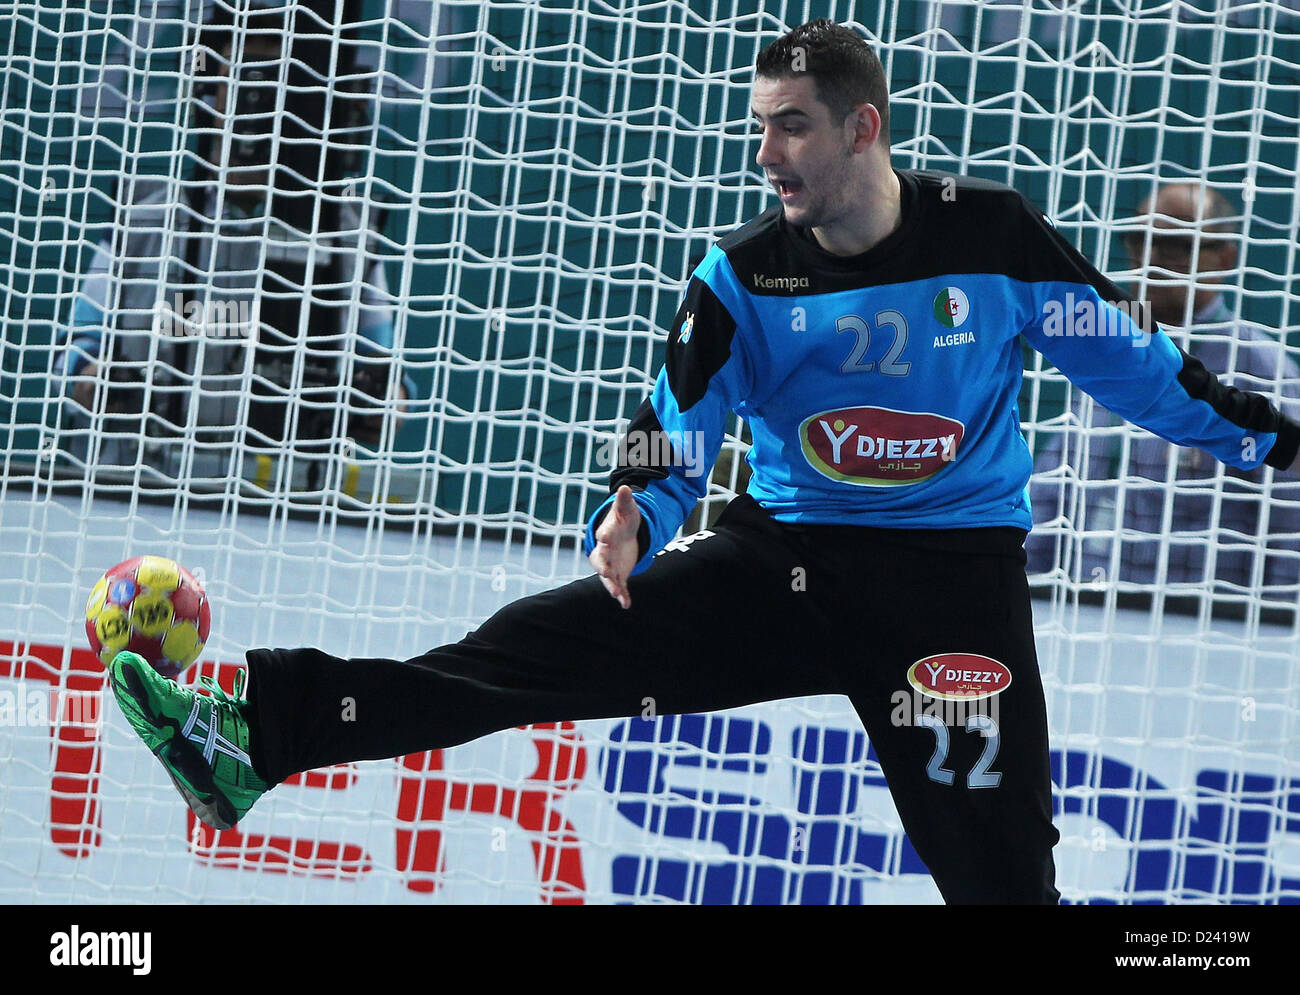 Goalkeeper Adel Bousmal of Algeria concedes a goal during the men's Handball World Championships main round match Spain vs Algeria in Madrid, Spain, 11 January 2013. Photo: Fabian Stratenschulte/dpa Stock Photo